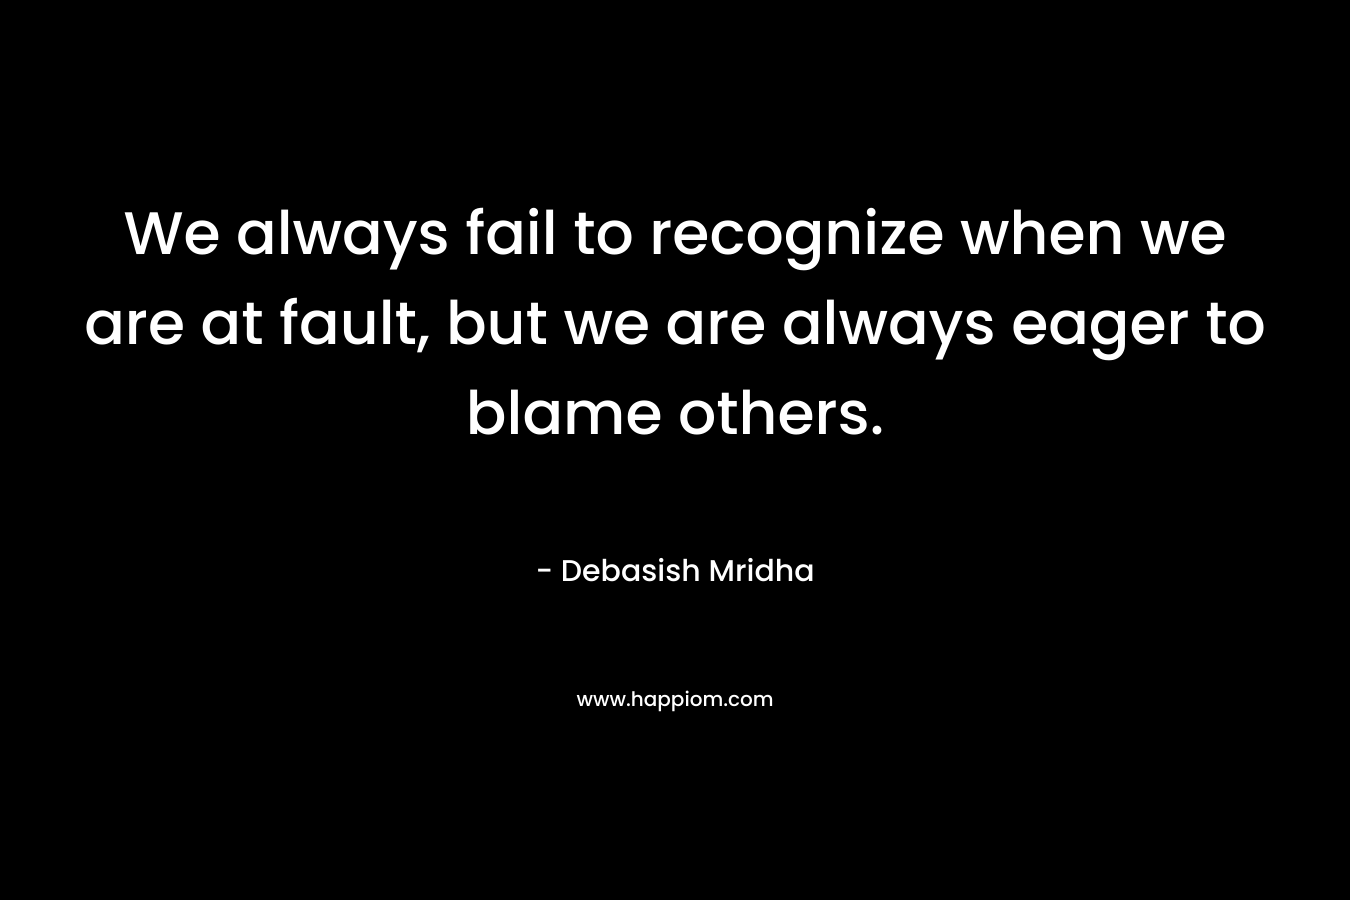 We always fail to recognize when we are at fault, but we are always eager to blame others. – Debasish Mridha